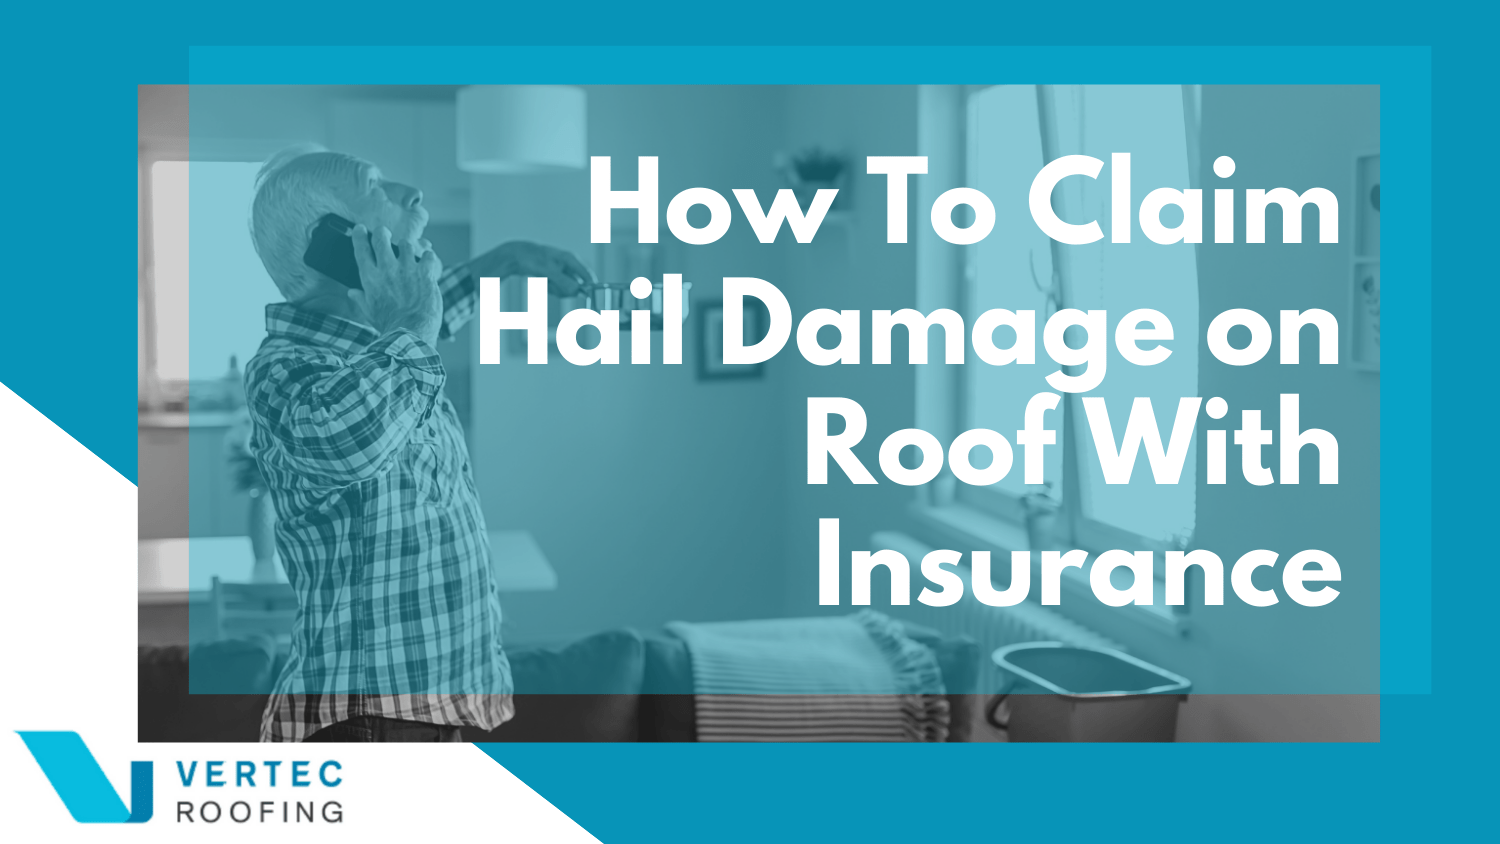 How To Claim Hail Damage on Roof With Insurance